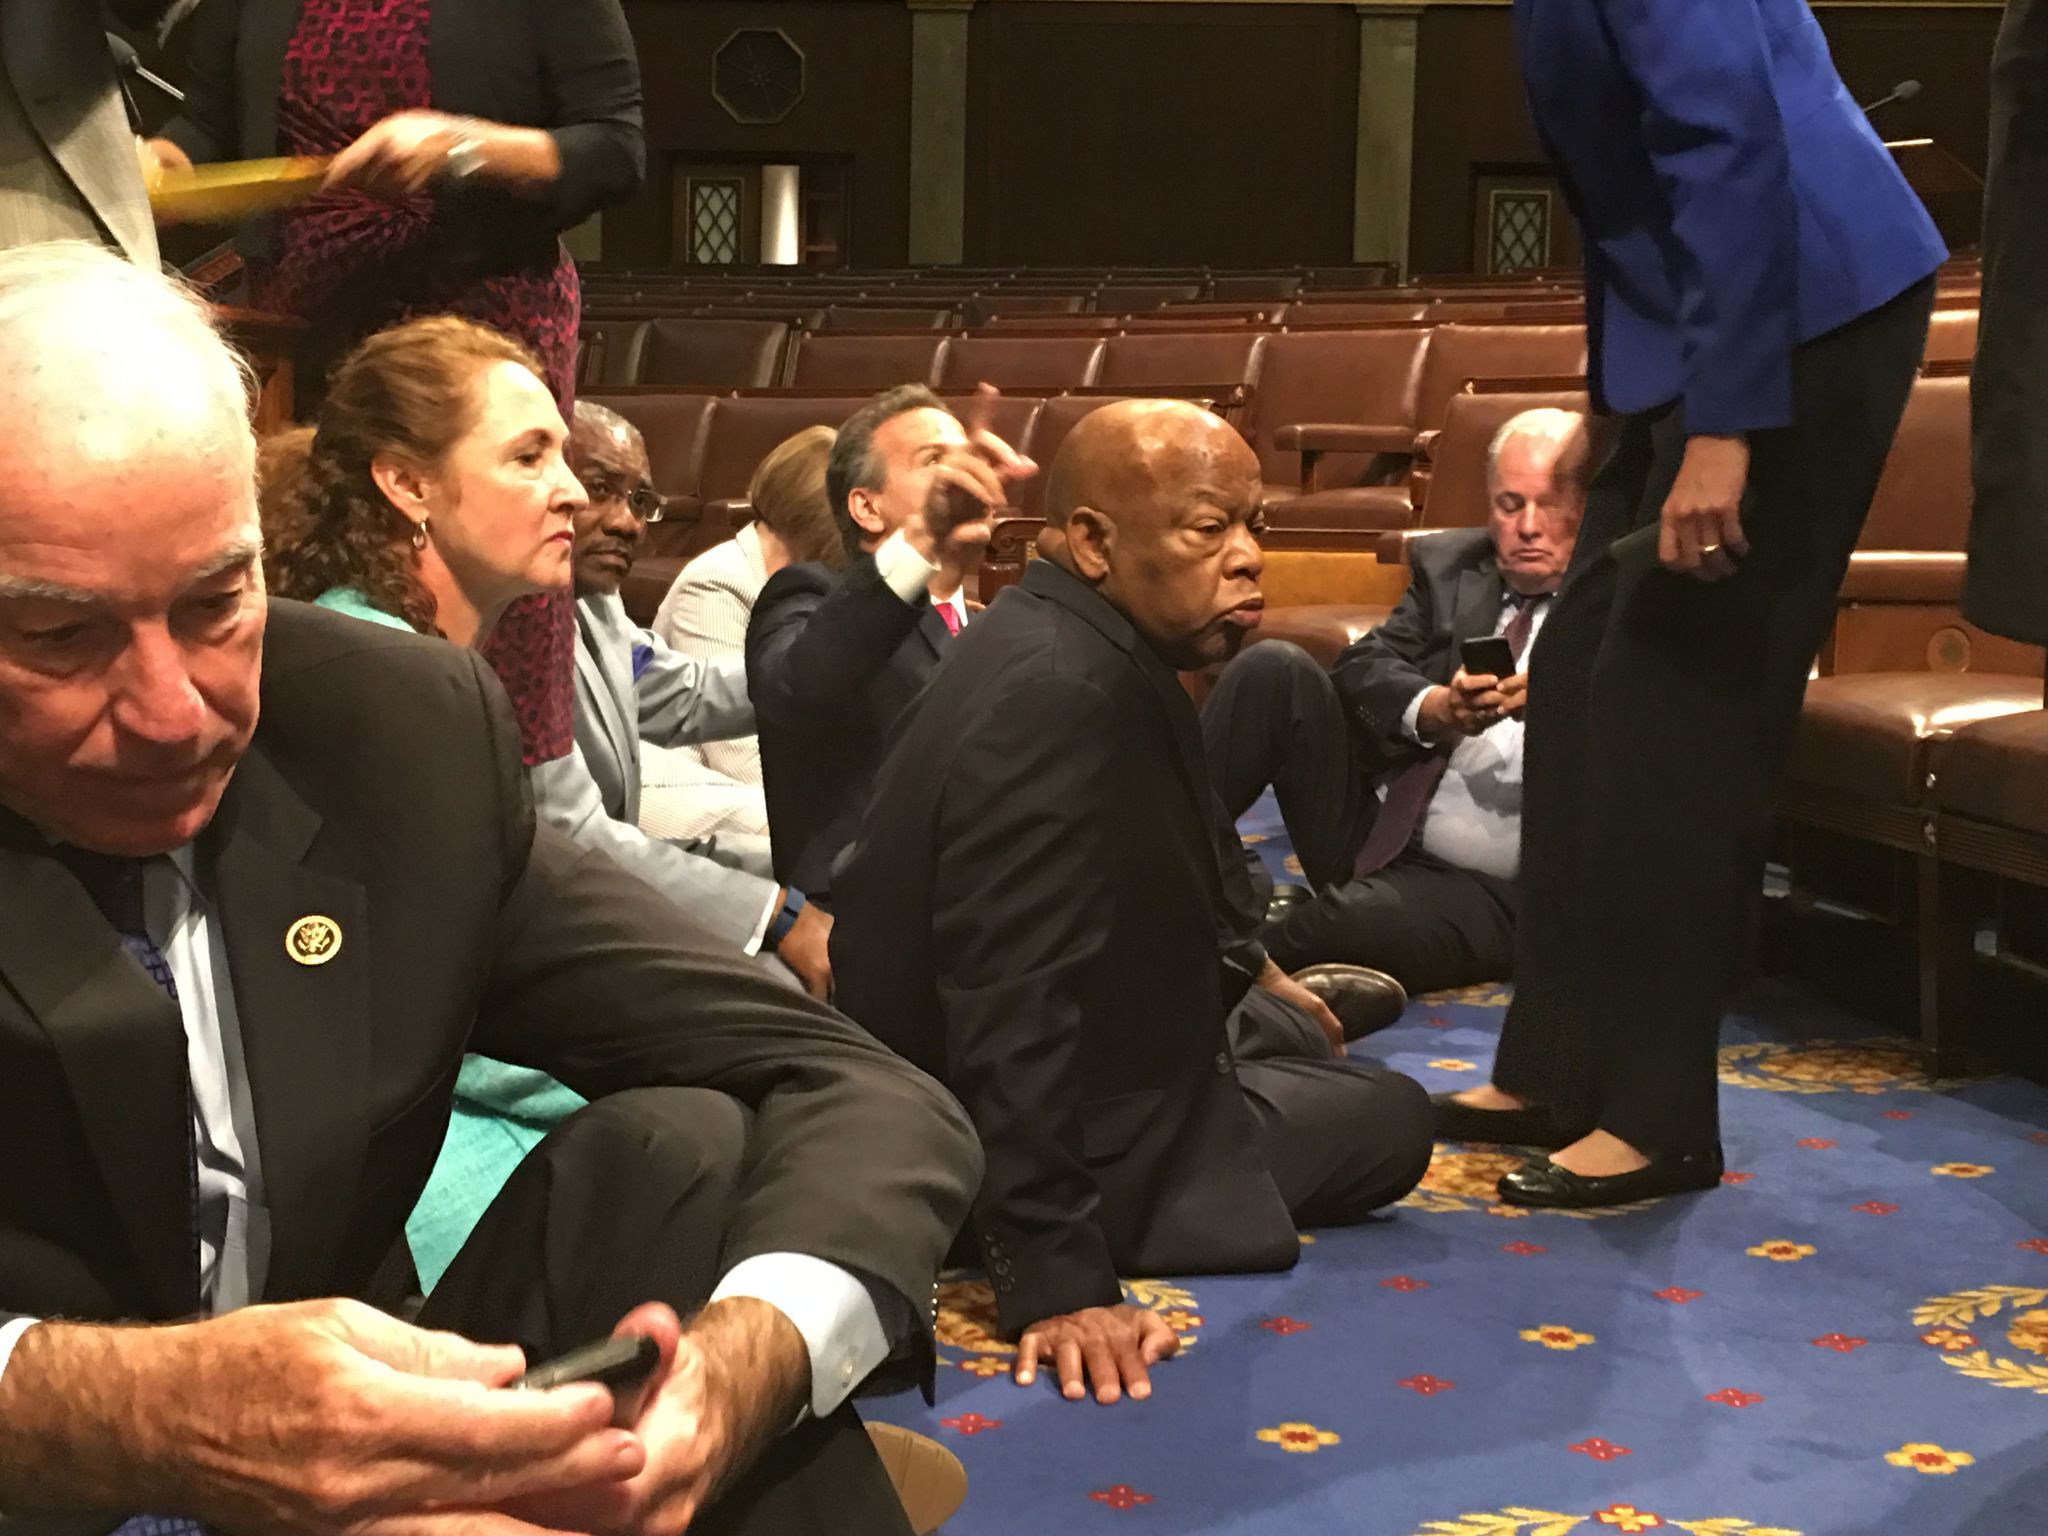 Democrats in Congress, including Rep. John Lewis, D-Ga. (center), and Rep. Joe Courtney, D-Conn. (left), take part in a sit-in protest seeking a vote on gun control measures Wednesday on the floor of the House in Washington.